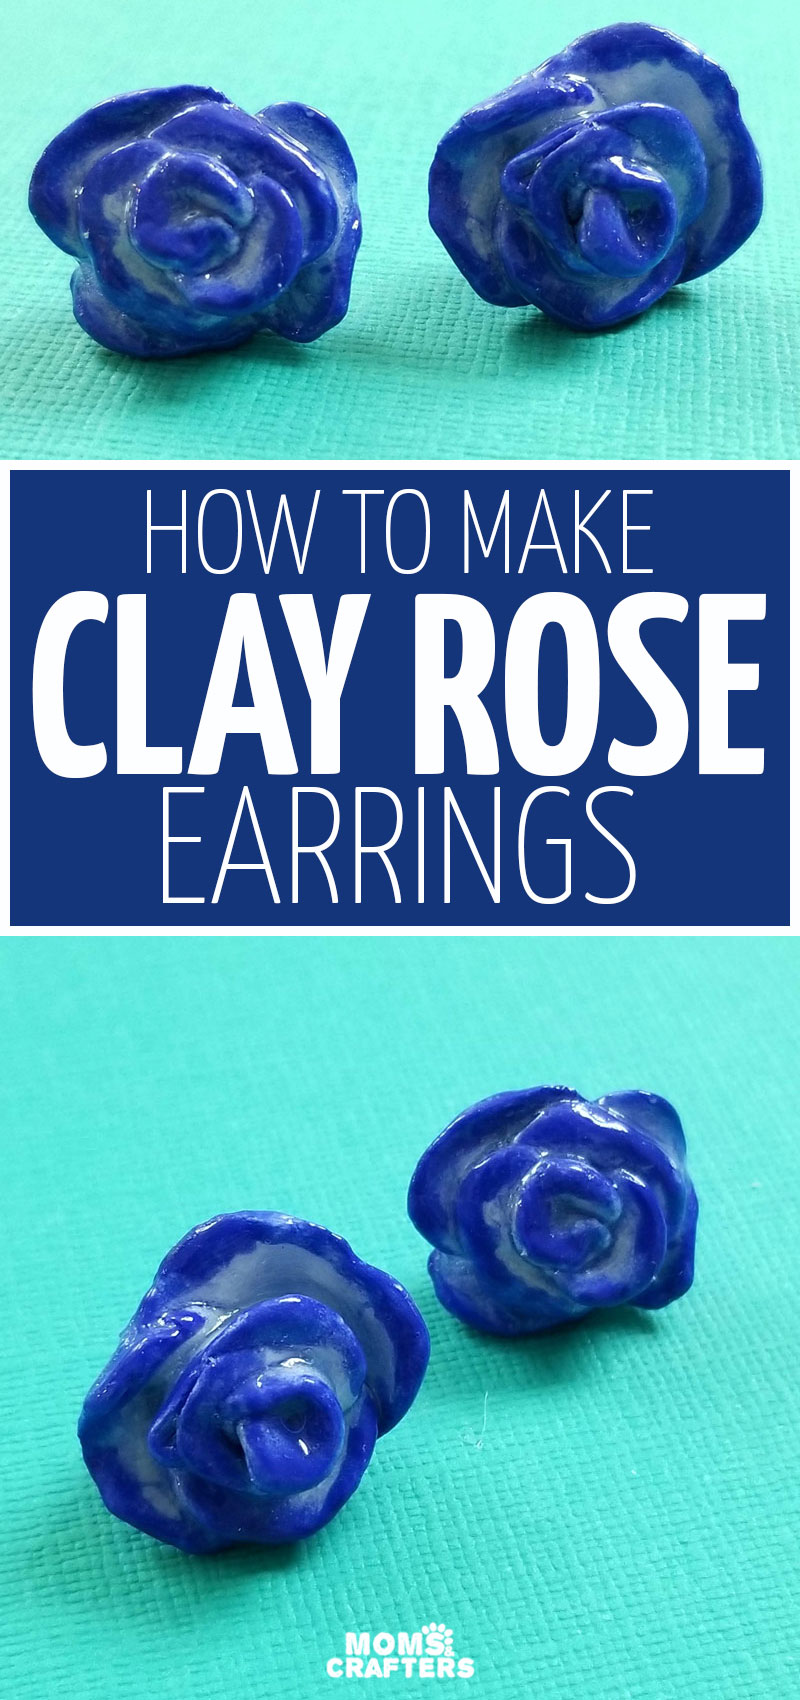 Click to learn how to make clay rose earrings with a beautiful watercolor finish! These dramatic studs statement earrings are a fun Spring and summer craft for teens and tweens and an easy jewelry making project for beginners.